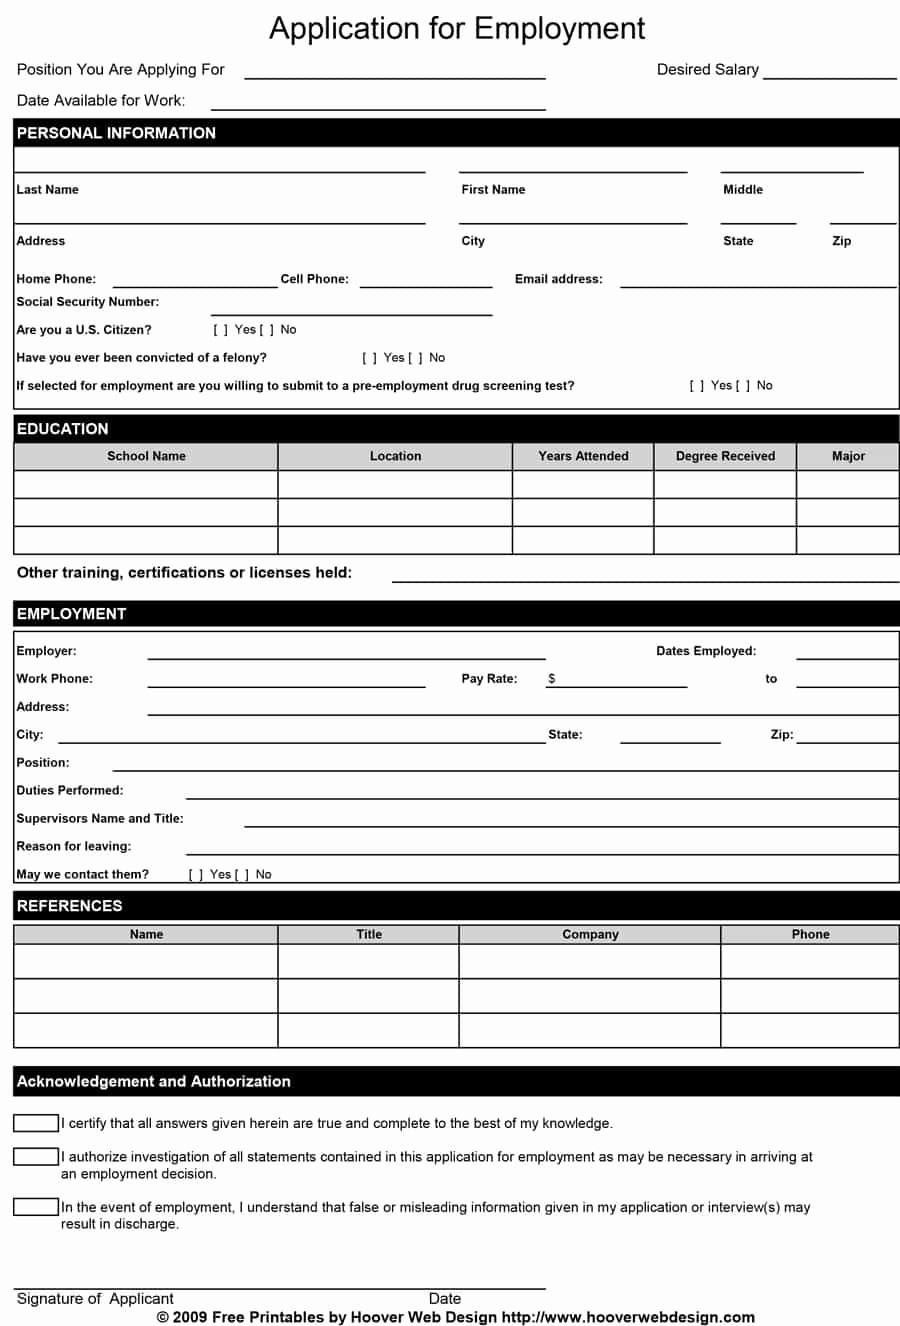 Generic Application for Employment Free Awesome 50 Free Employment Job Application form Templates